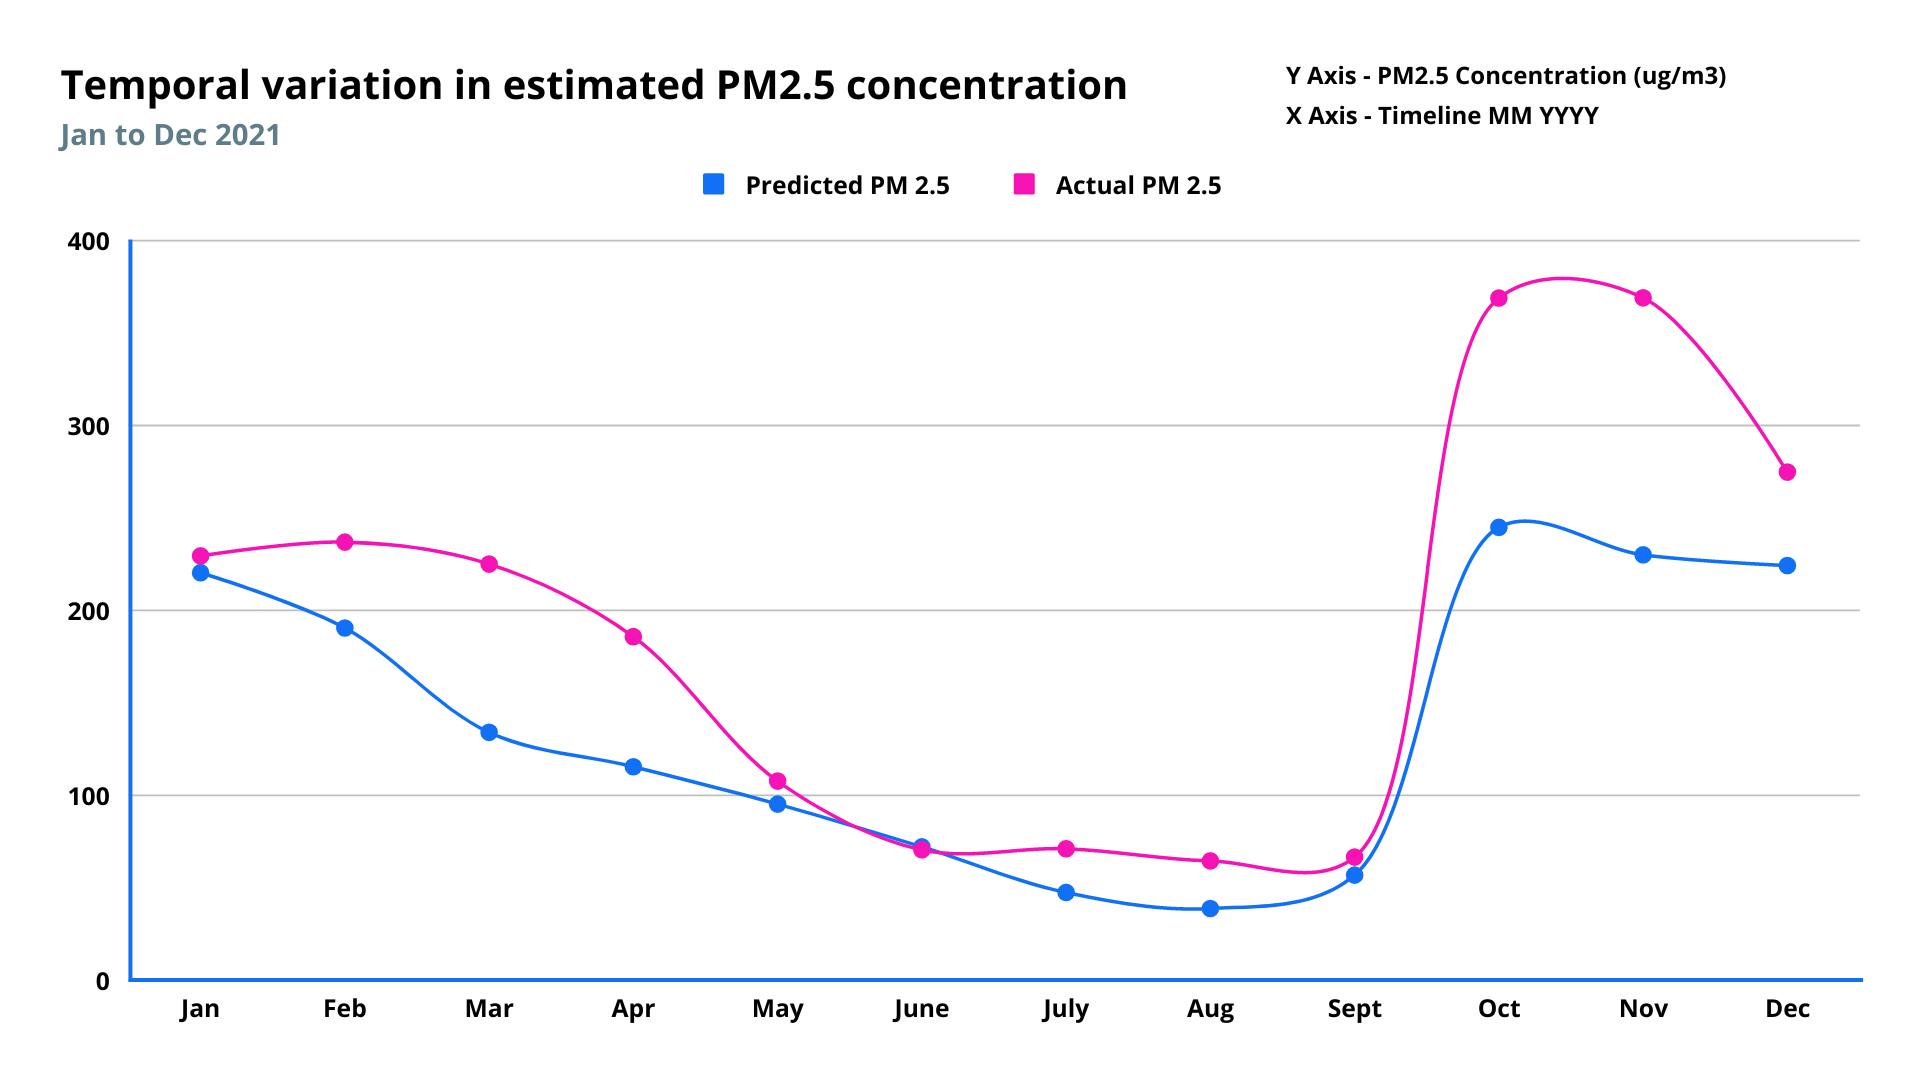 The chart shows how PM2.5 levels fluctuate over time for Patna, Bihar.